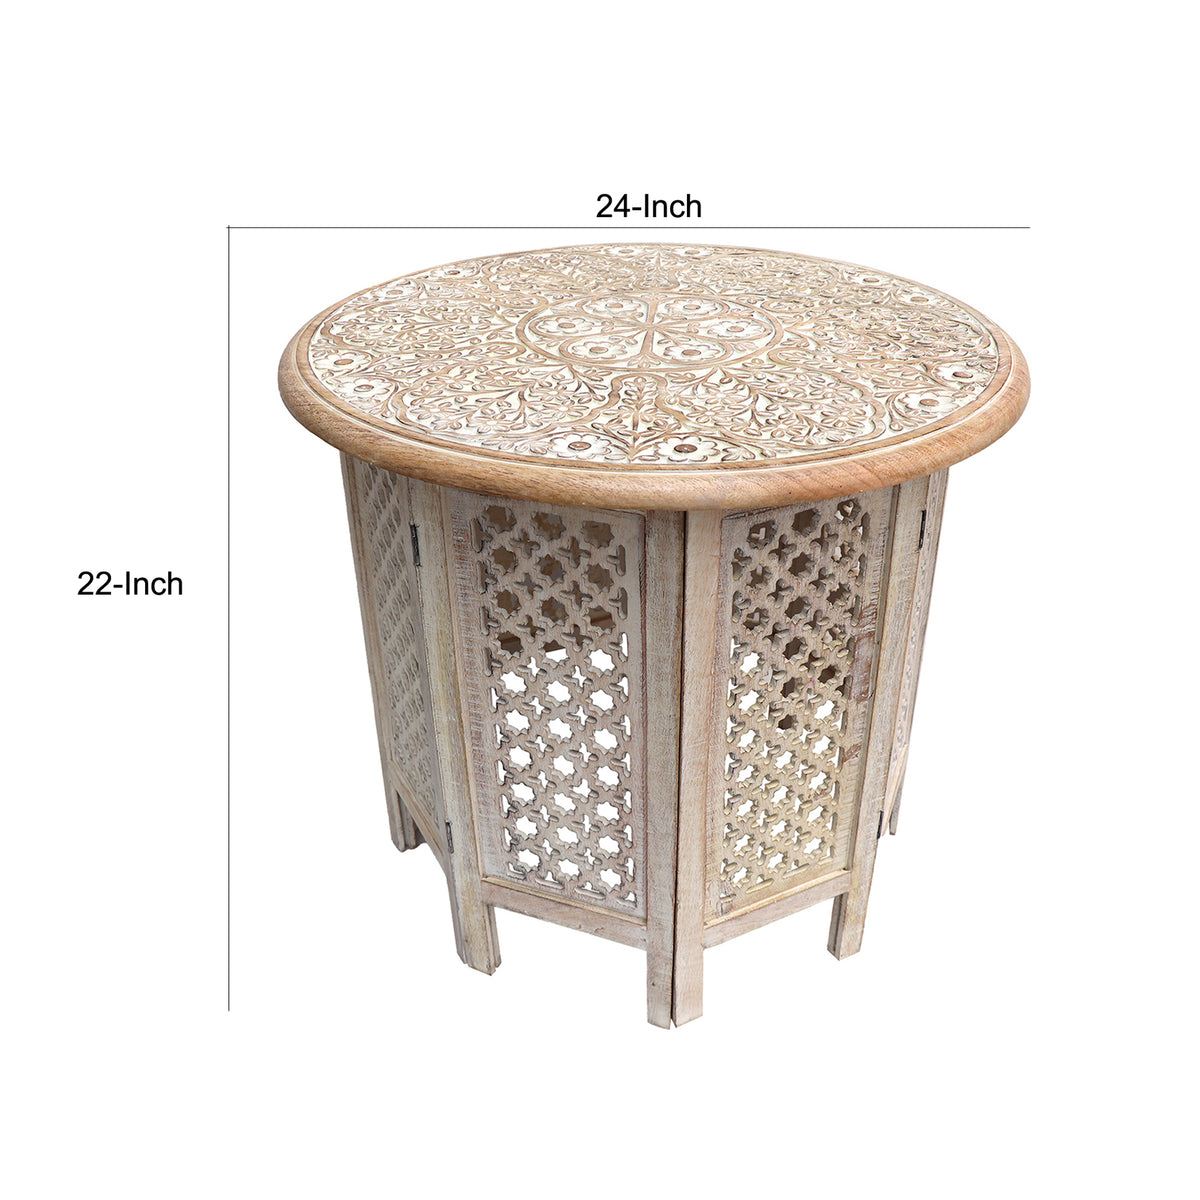 Mesh Cut Out Carved Mango Wood Octagonal Folding Table with Round Top, Antique White and Brown - UPT-209568